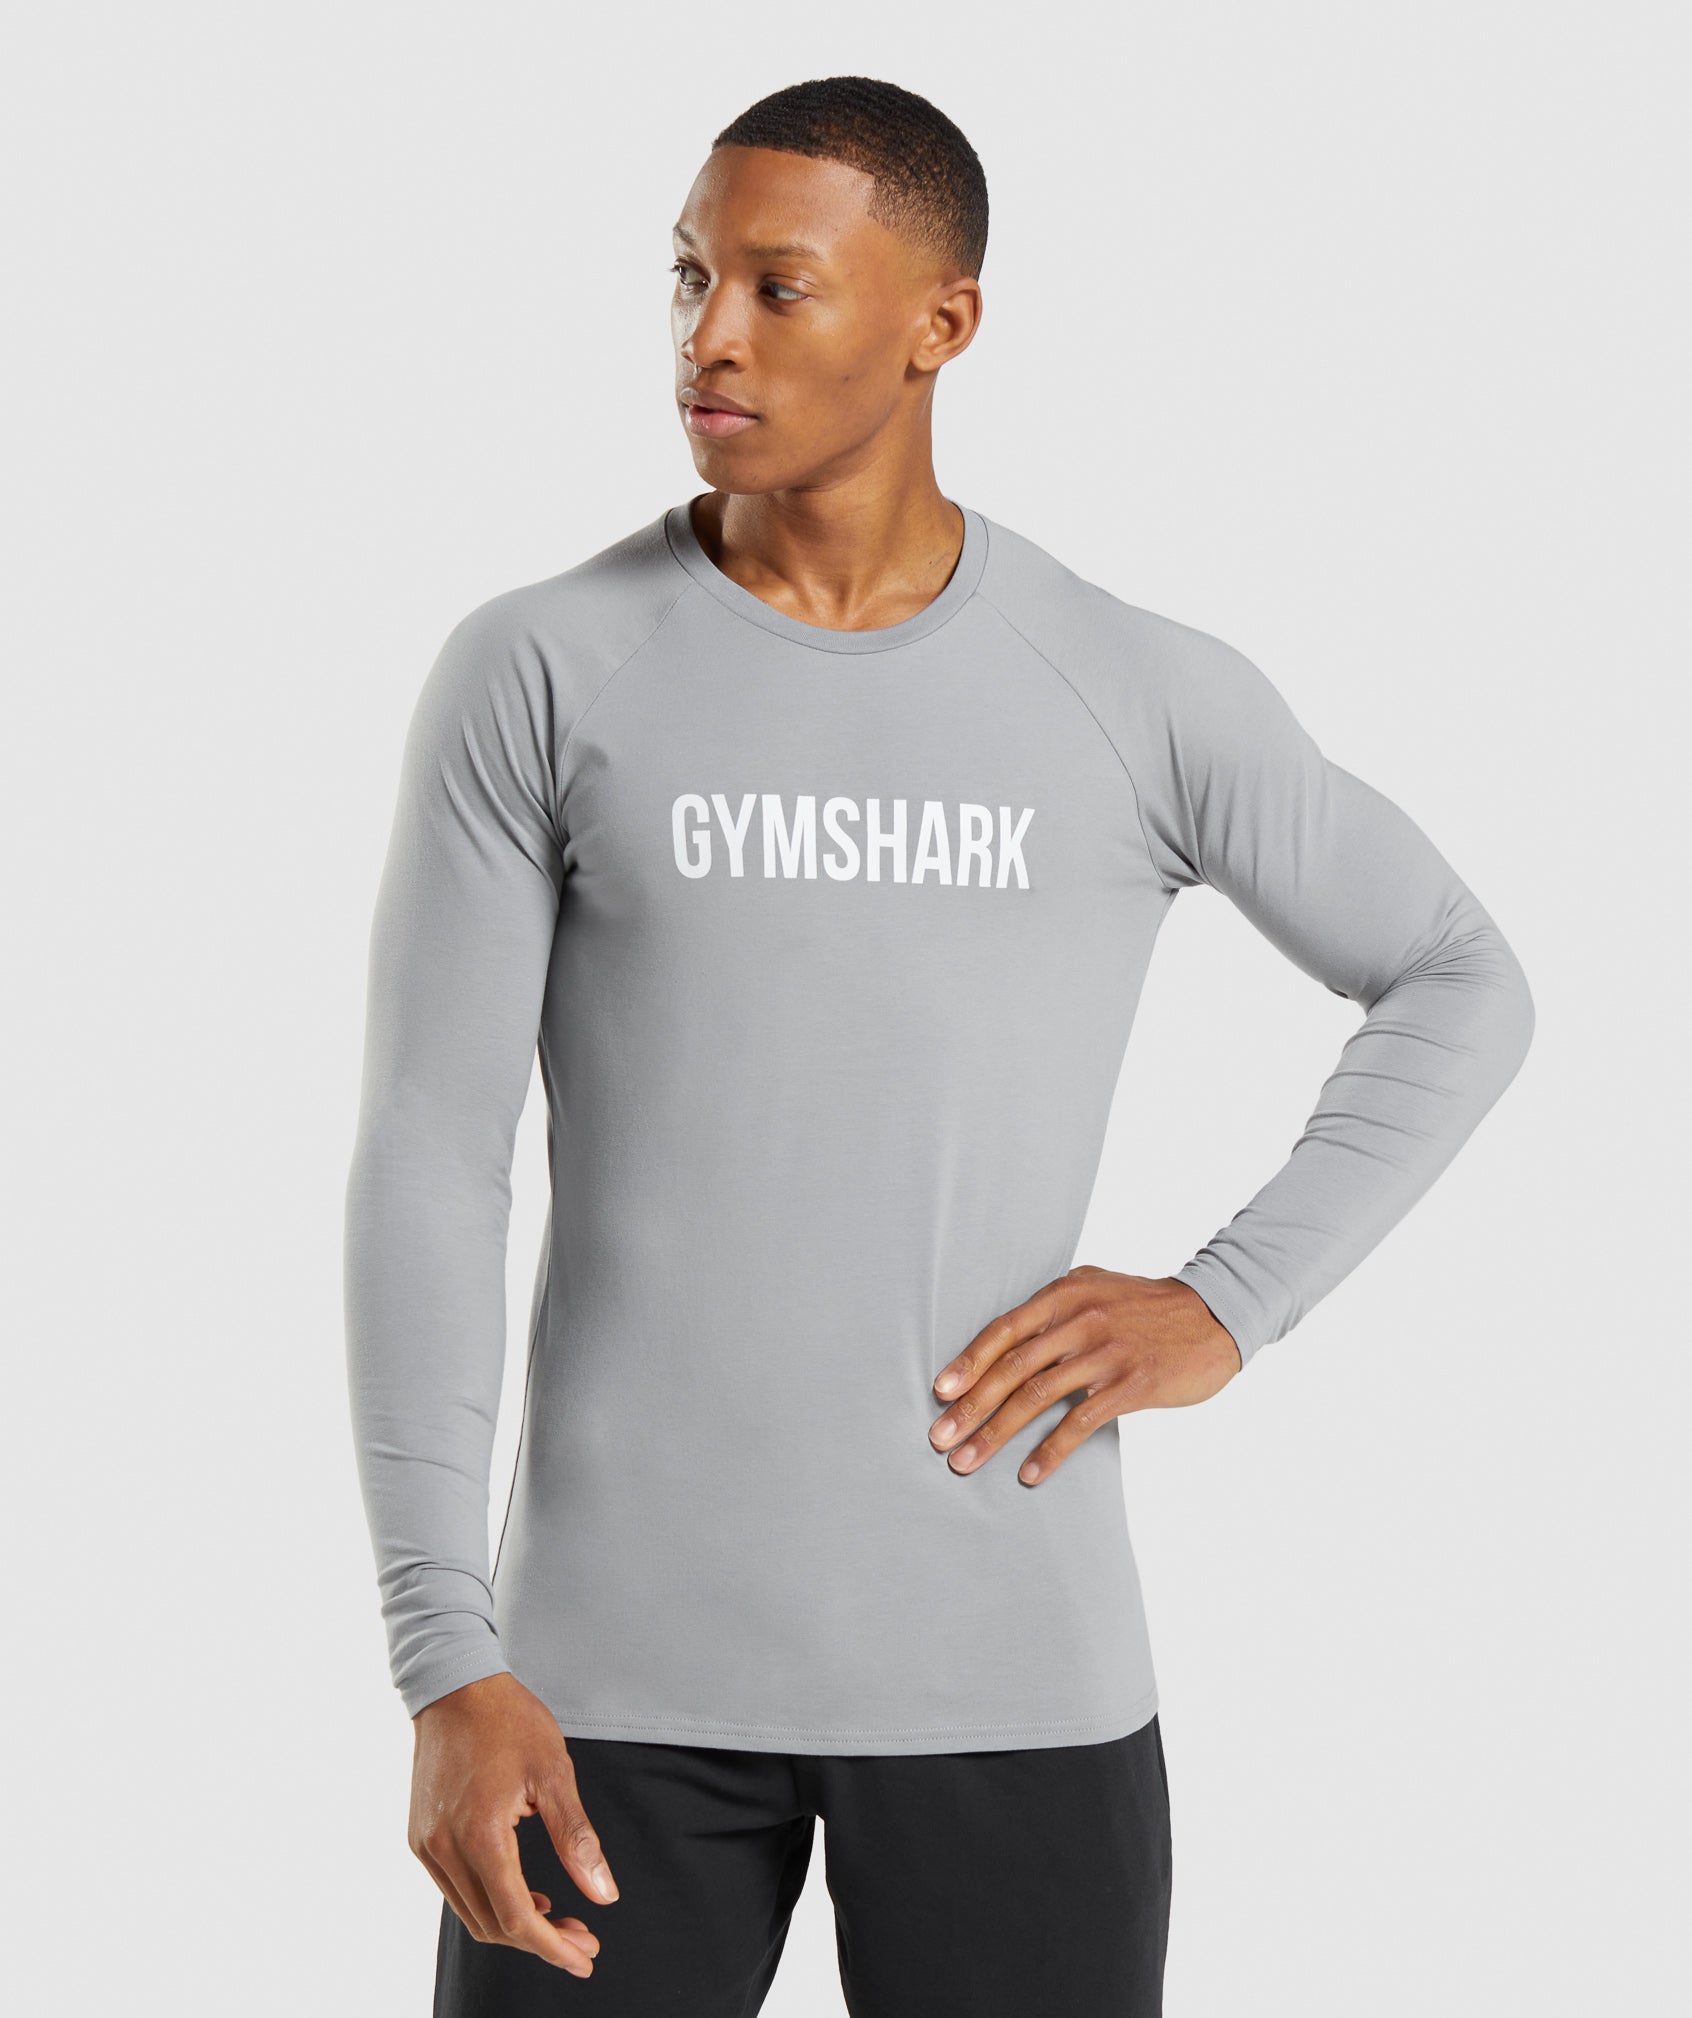 Outfit Of The Day - Gymshark Apollo T-Shirts! 🔥💪🦈 Time to spice up your  workout session with this lit Gymshark tee. The Apollo features a statement  design and a classic T-shirt fit.